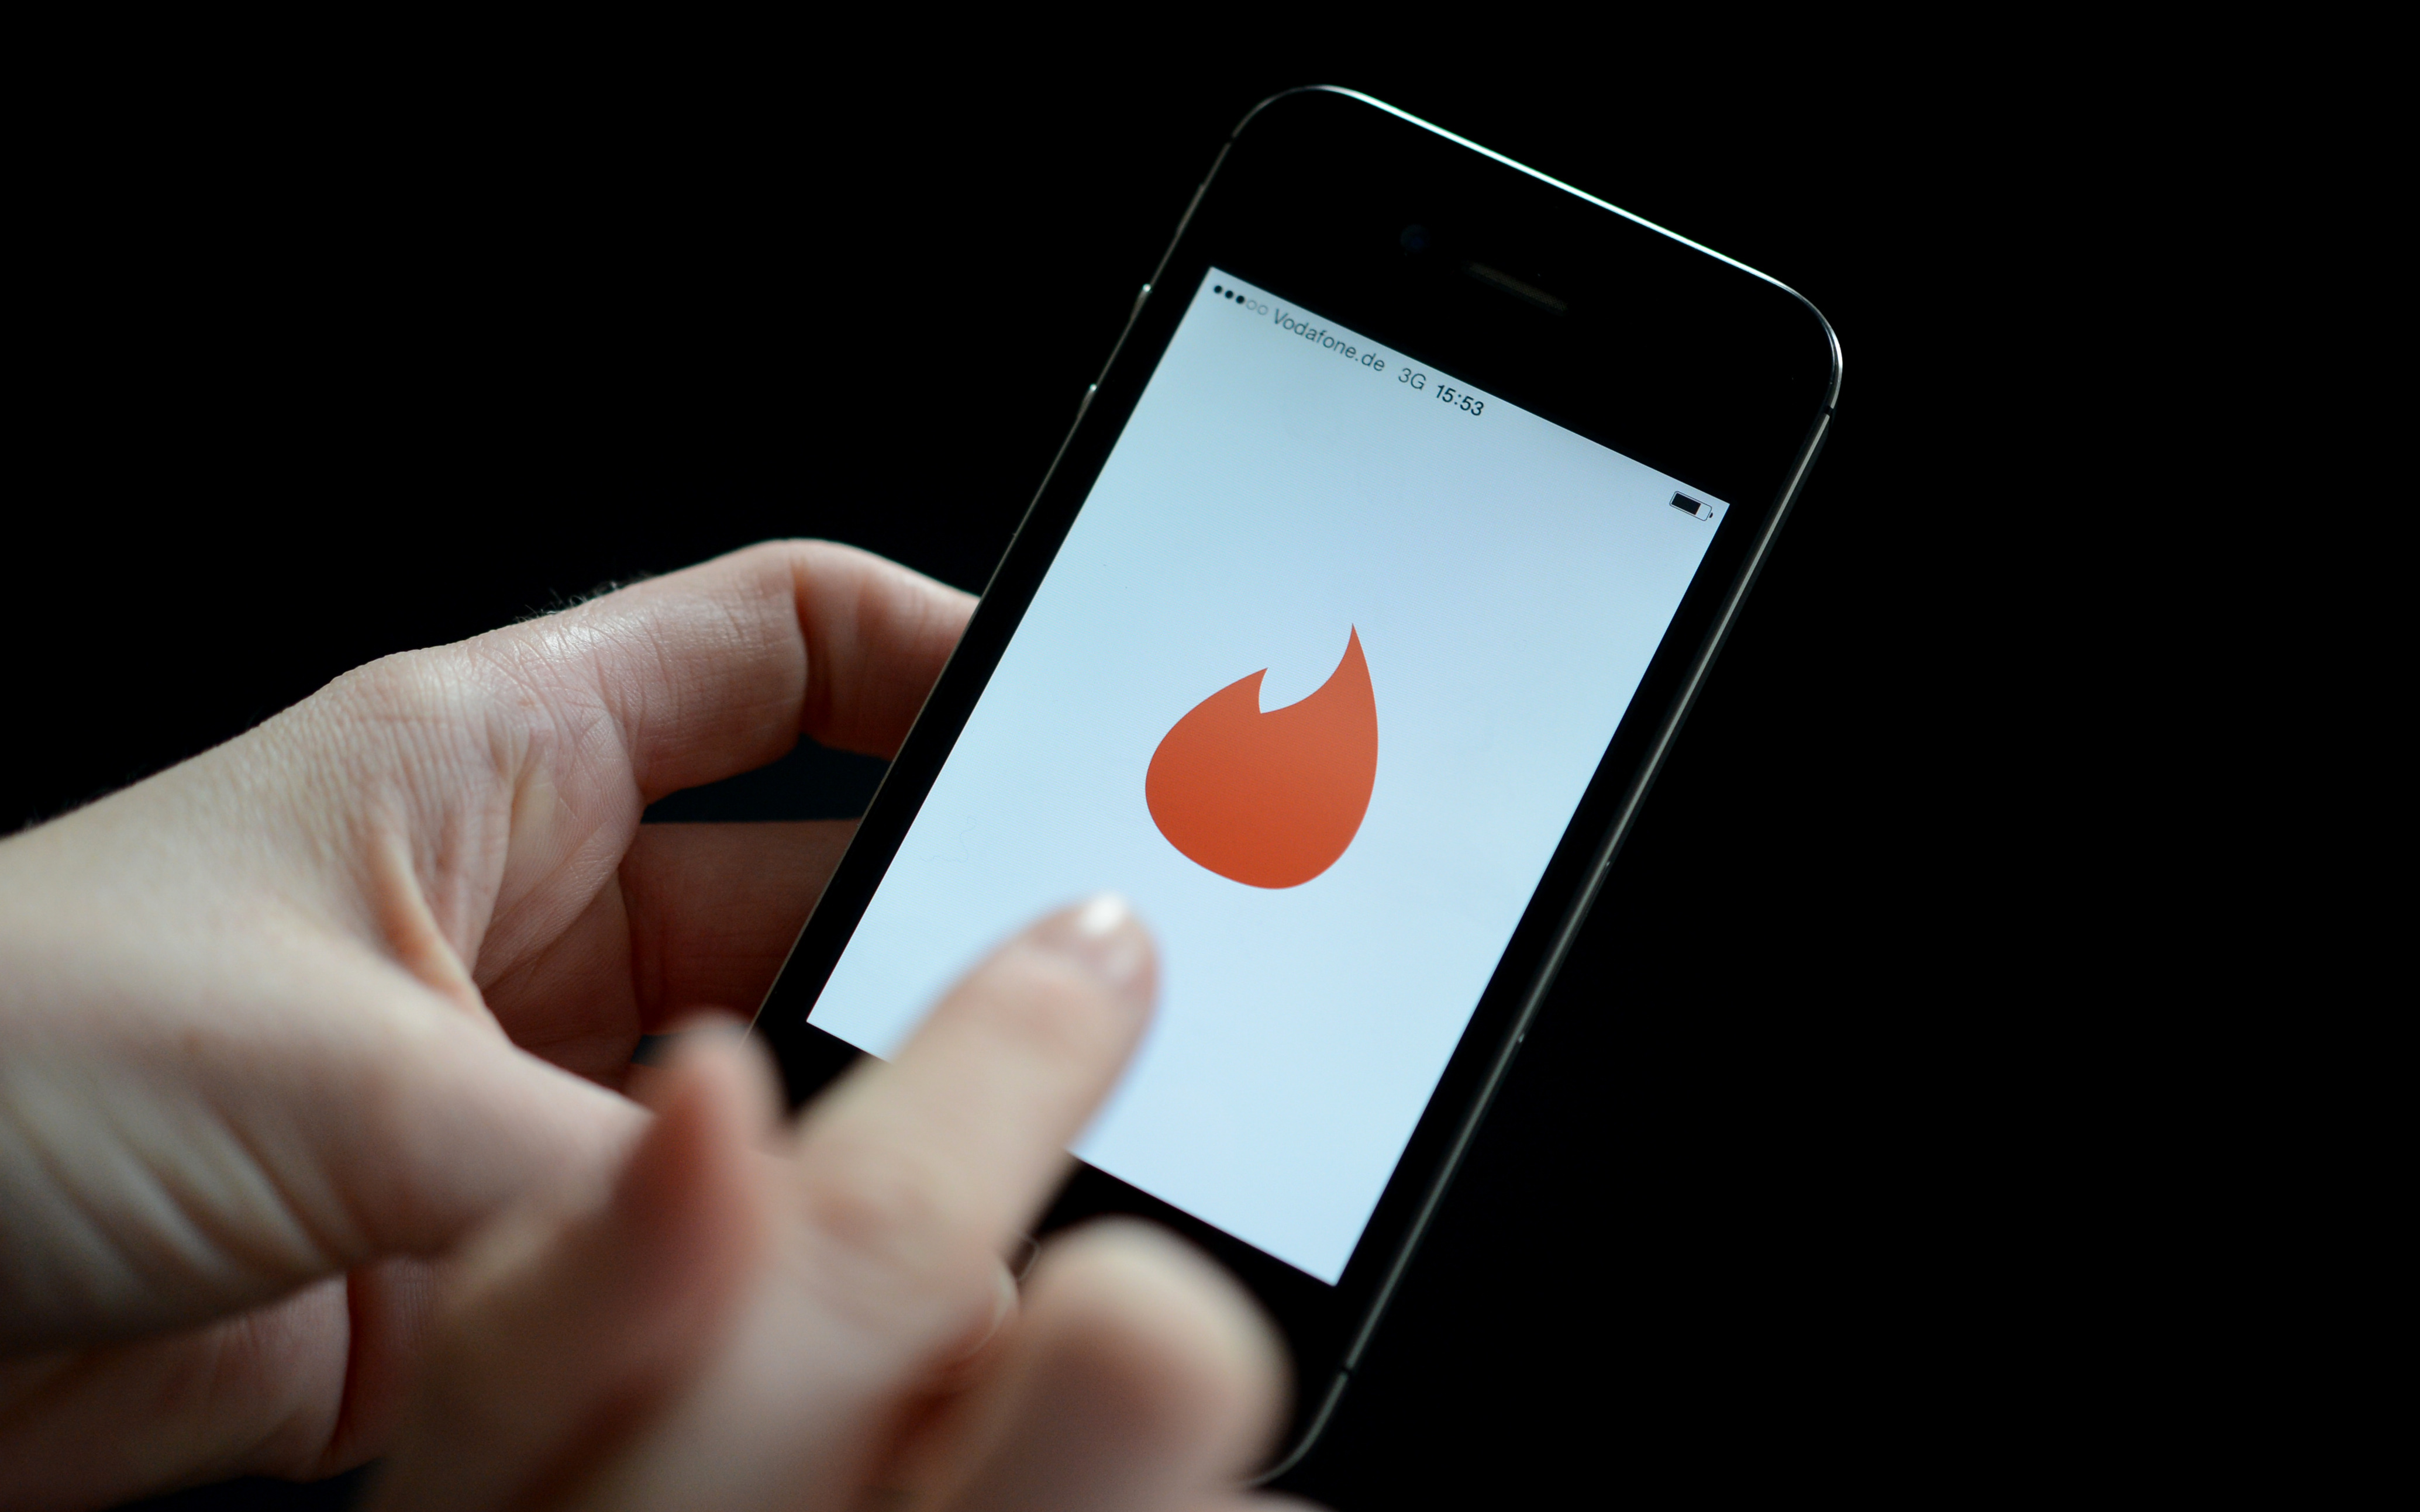 How to add tinder back to facebook